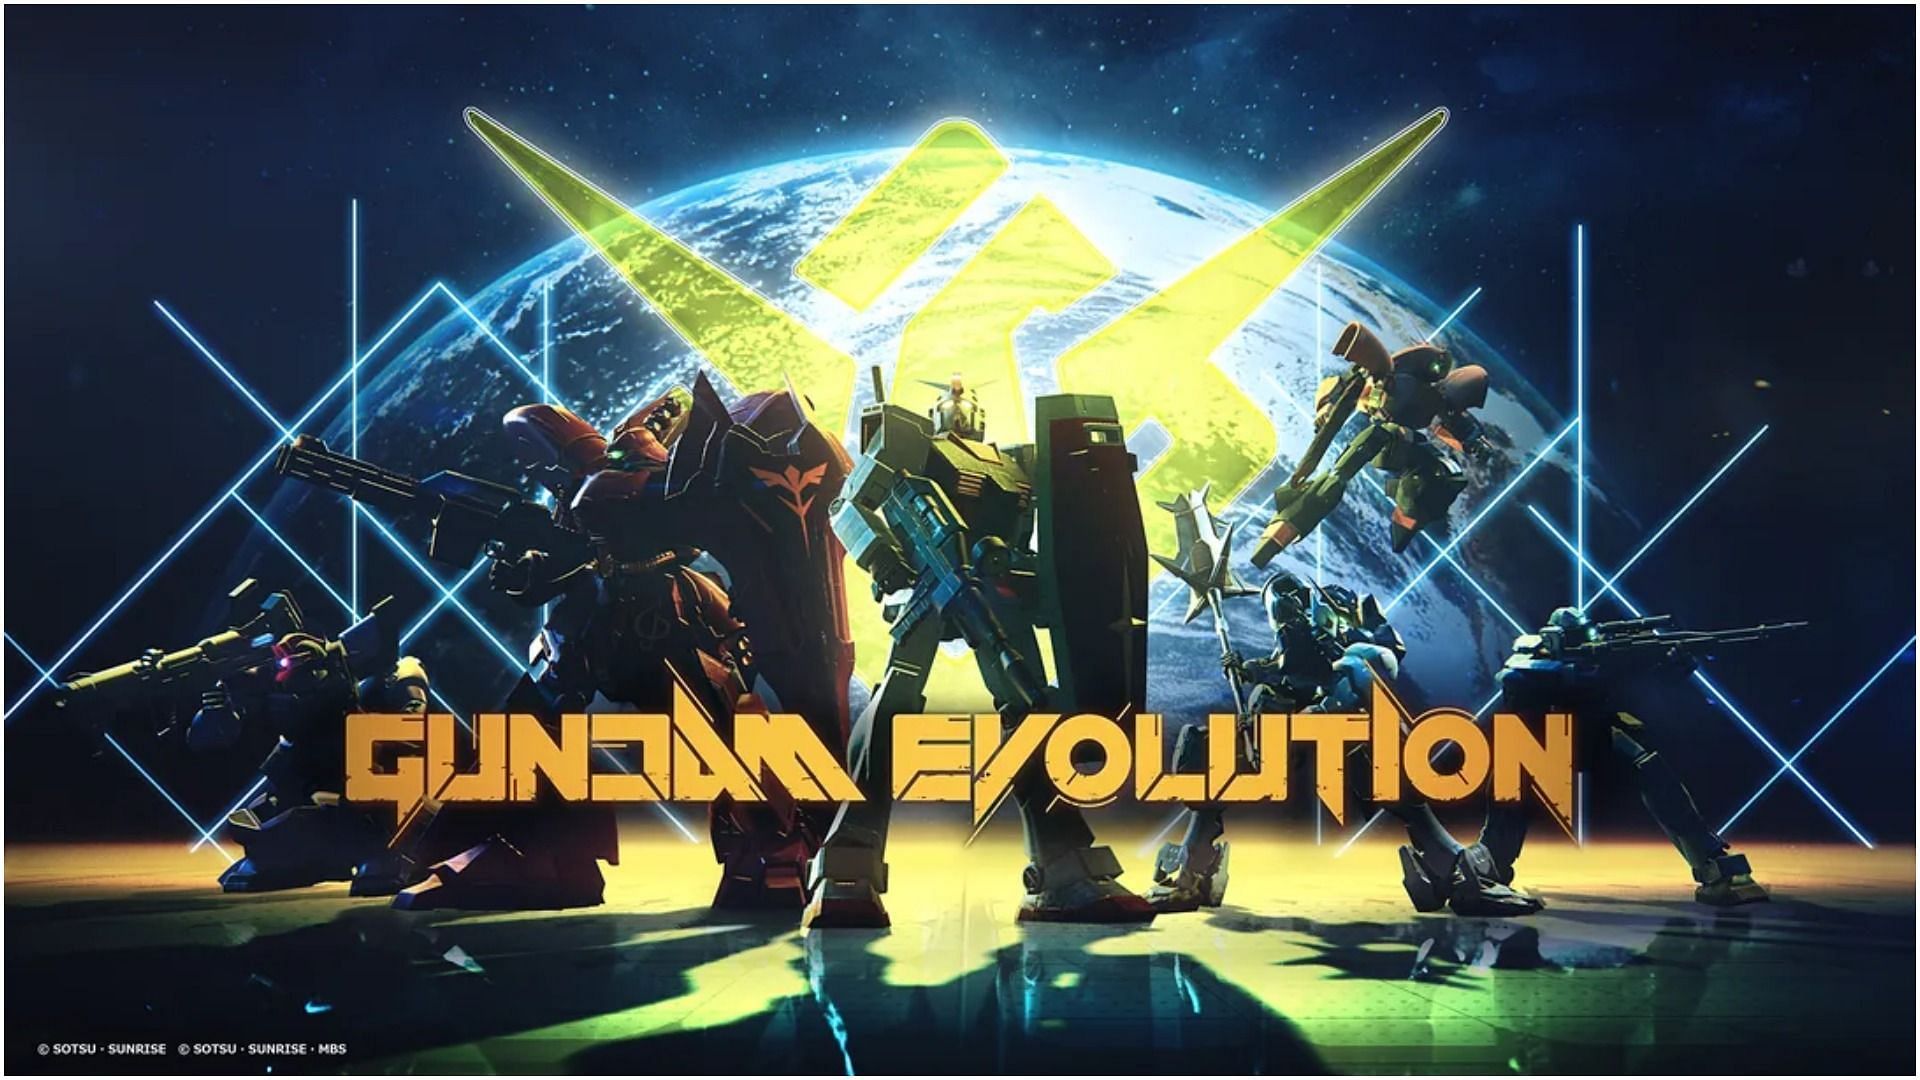 Gundam Evolution is being touted as an &quot;ideal shooter for gamers of all skill levels to enjoy solo or with a group of friends&quot; (Image via PlayStation)